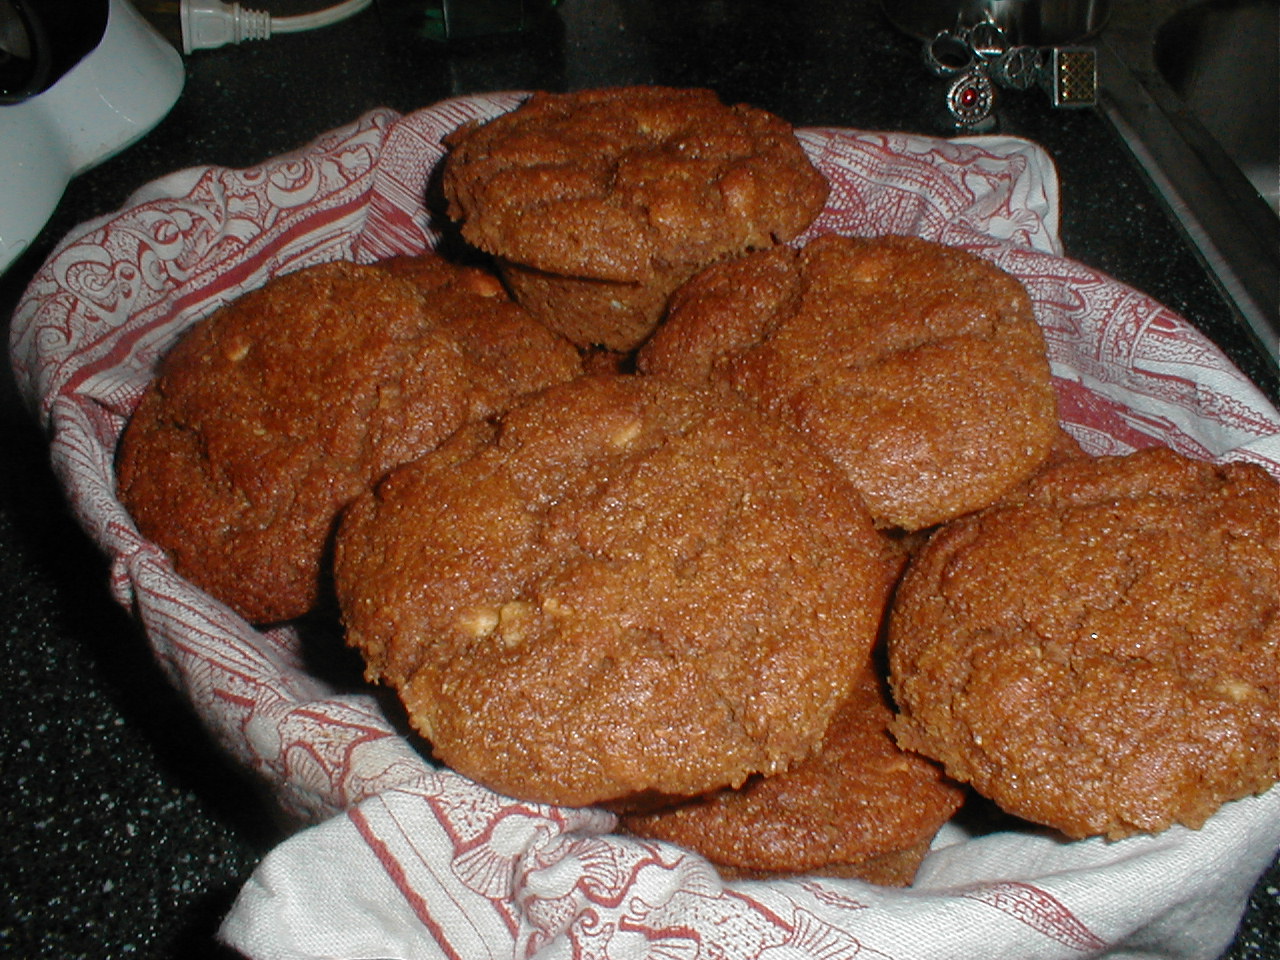 cookies are in a glass bowl on a counter